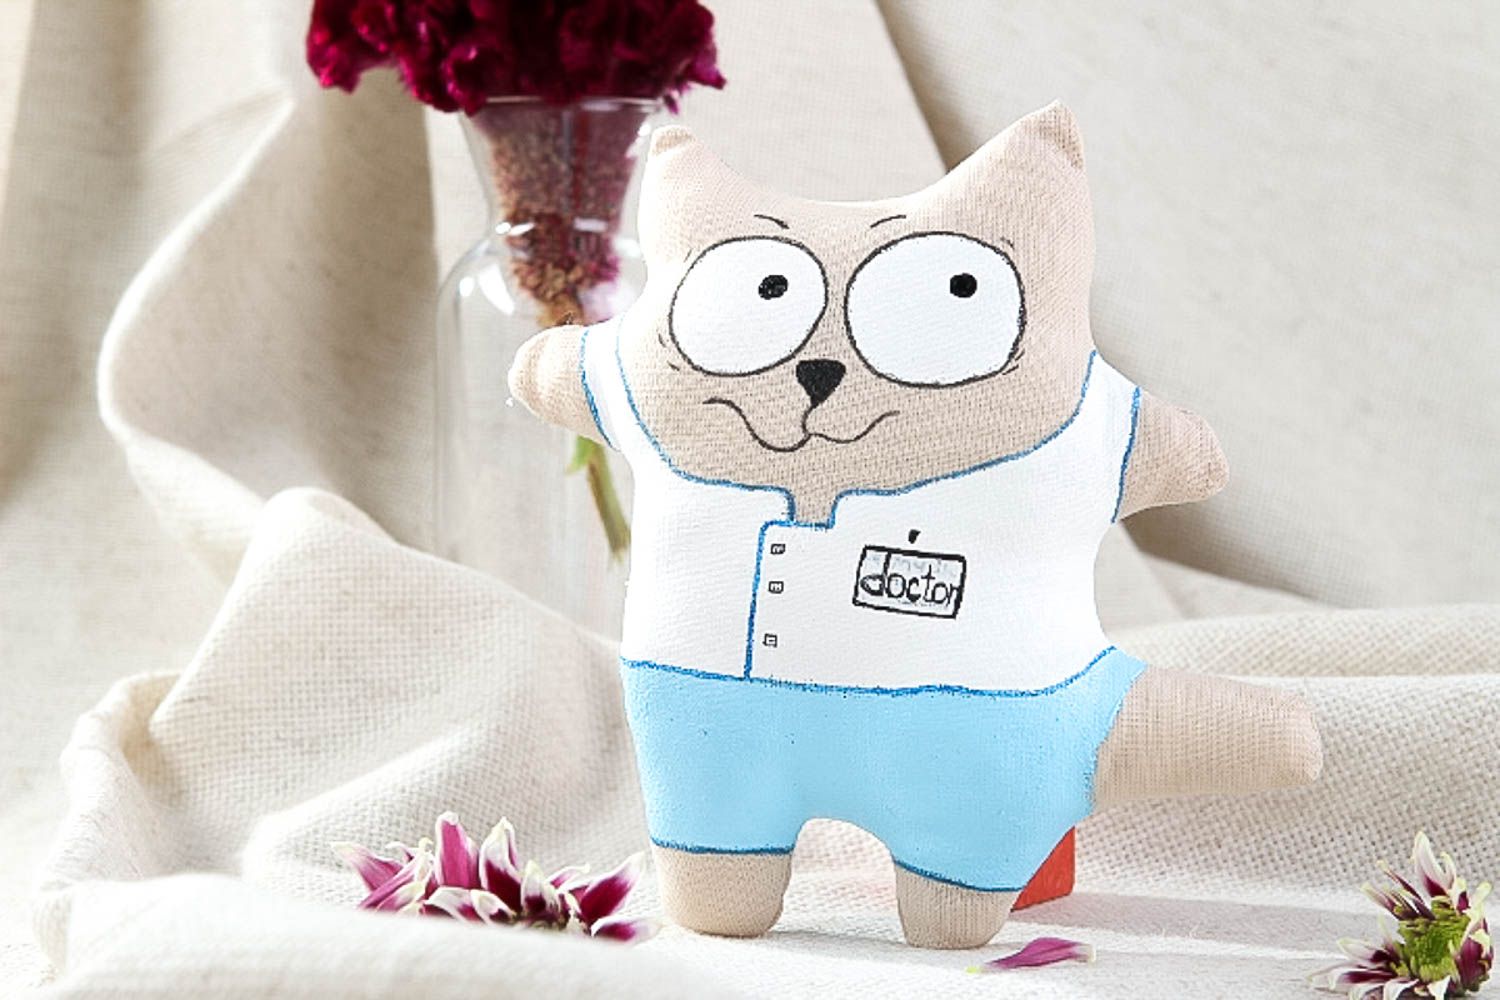 Handmade aroma fabric toy soft toy cool bedrooms gift ideas decorative use only photo 1